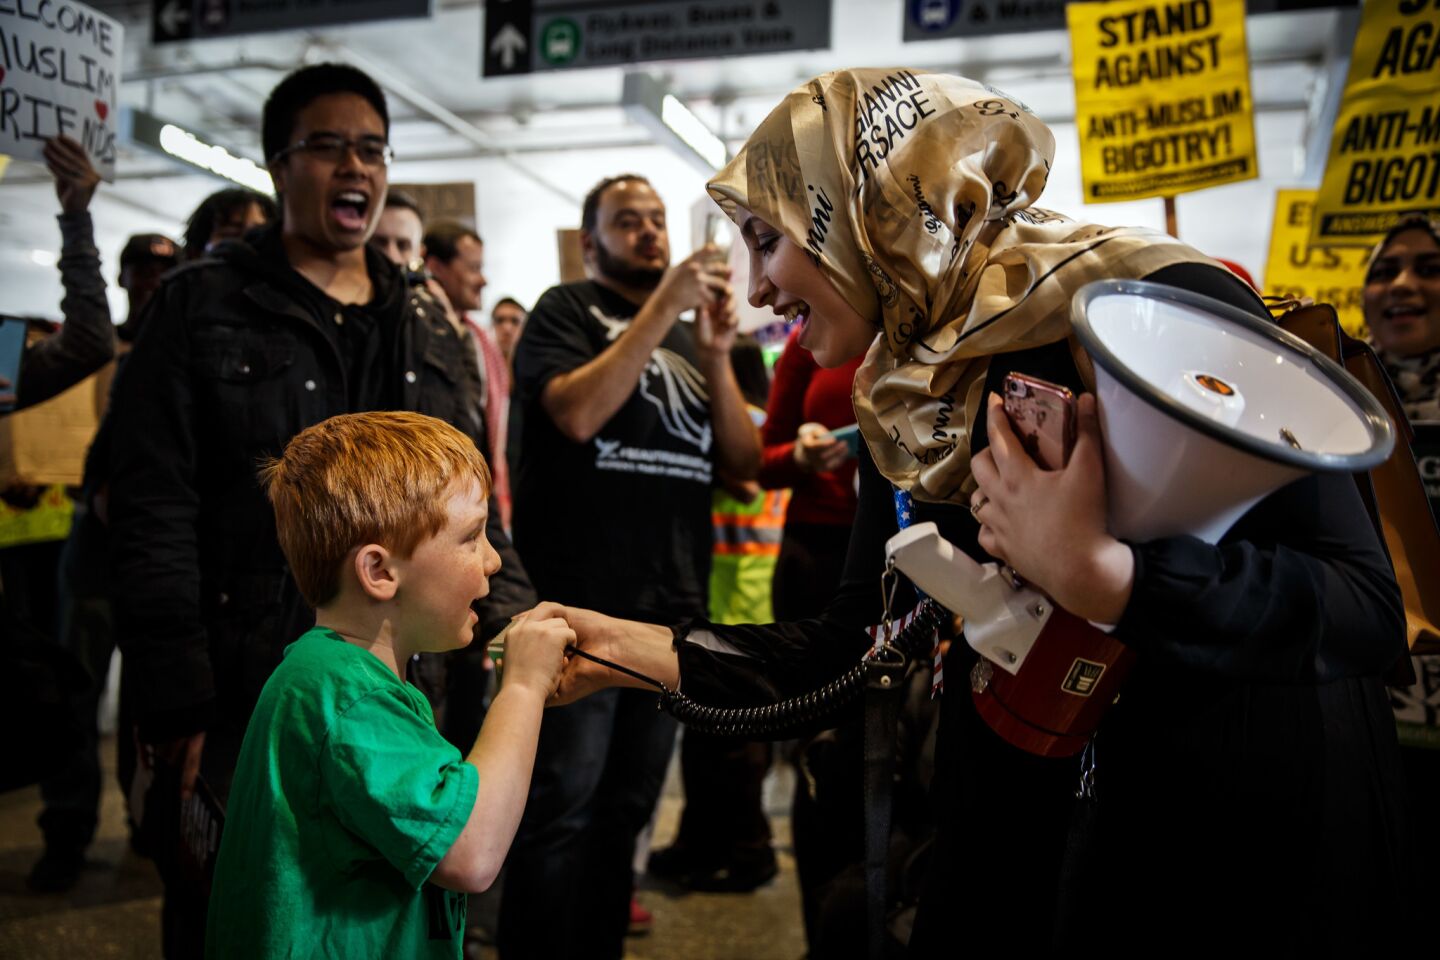 Cooper Chvotkin, 6, gets a turn to voice his opinion on the megaphone with other protesters at LAX on Saturday.